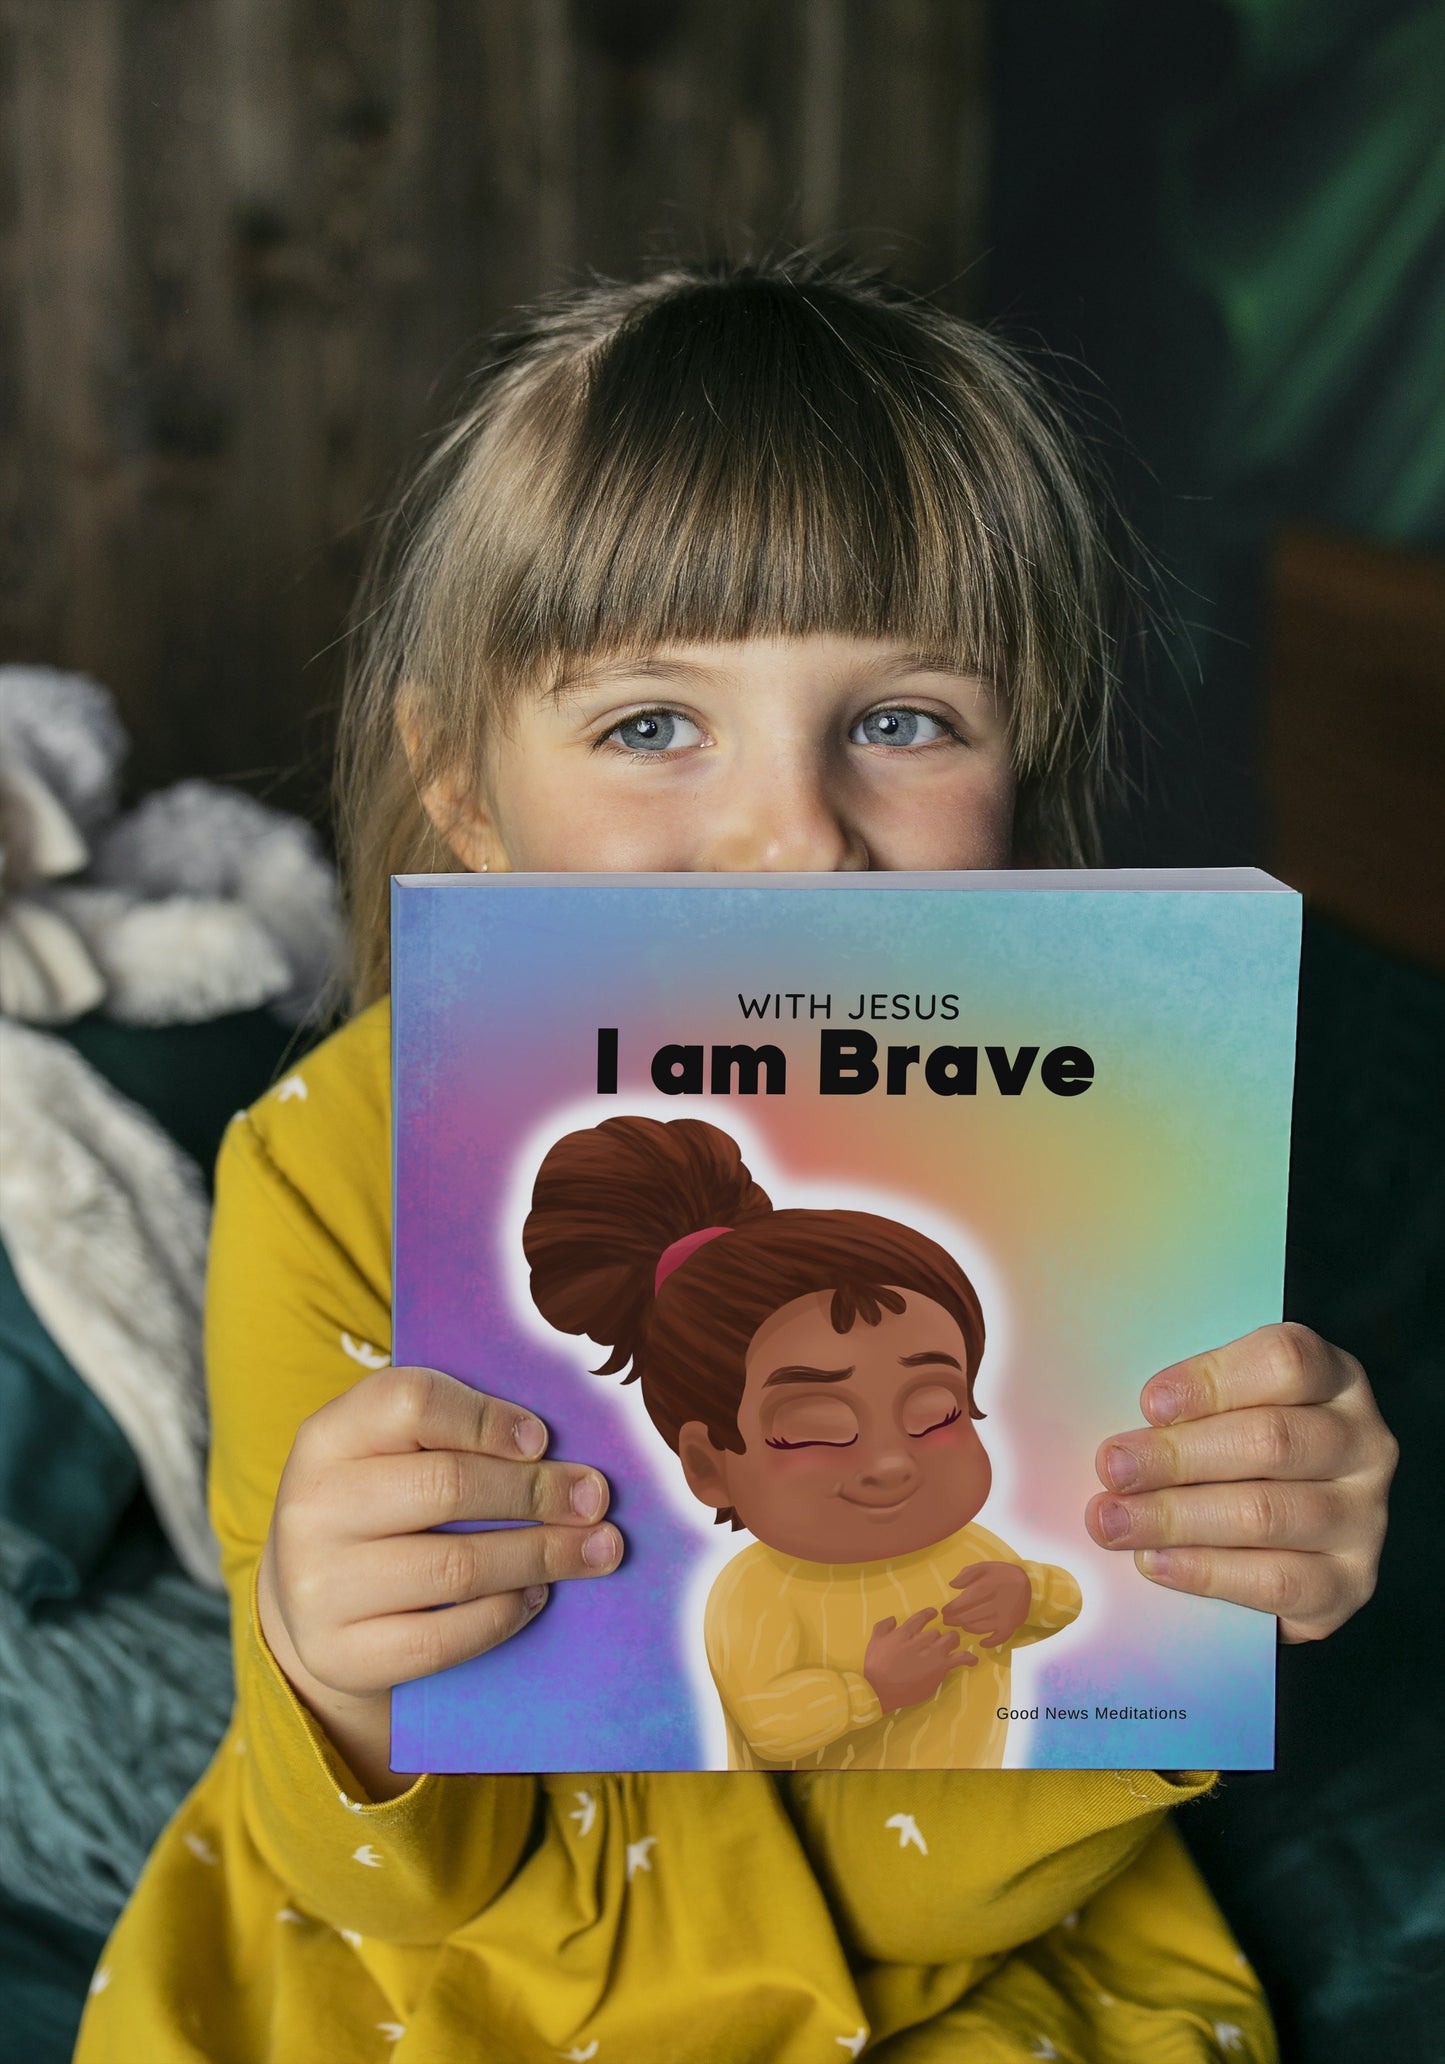 With Jesus I am Brave - Printed in the UK